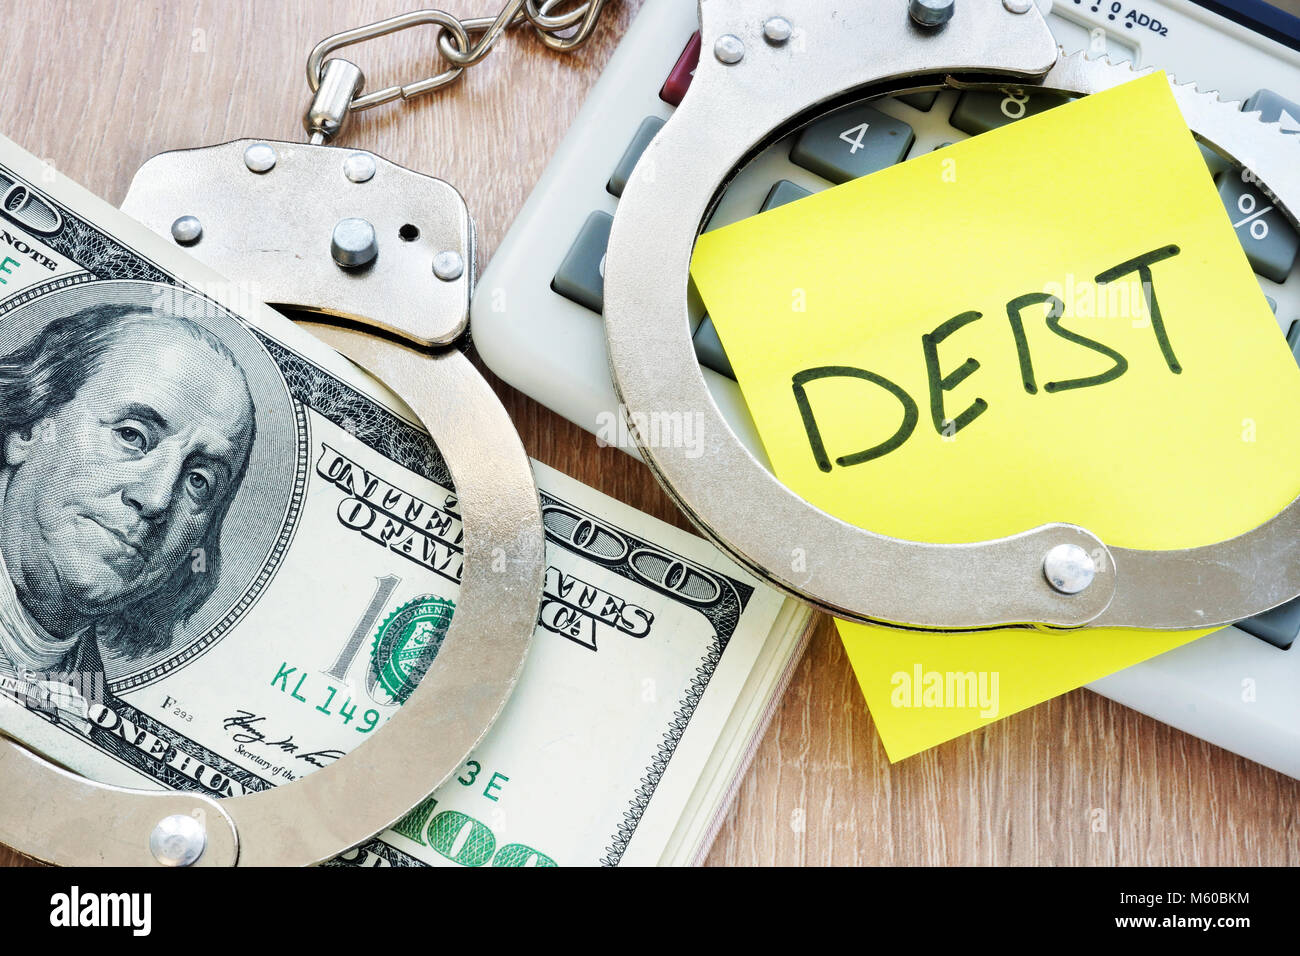 Debt in handcuffs and money for payment. Problems with loans. Stock Photo